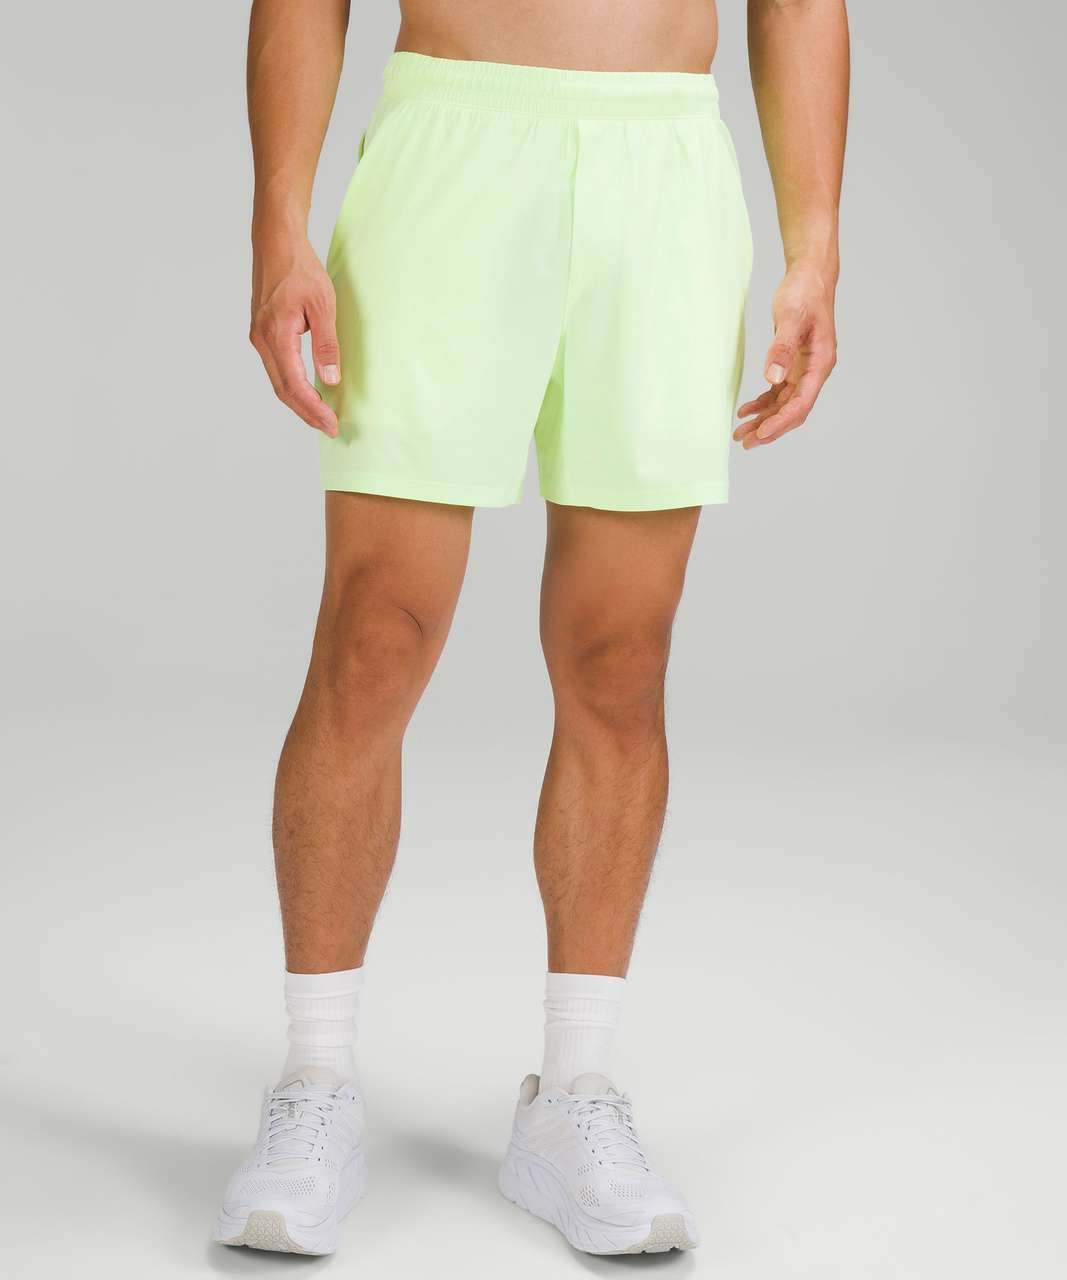 What Is The Difference? Which Is Better? T.H.E. Shorts vs Pace Breaker  Shorts by Lululemon 